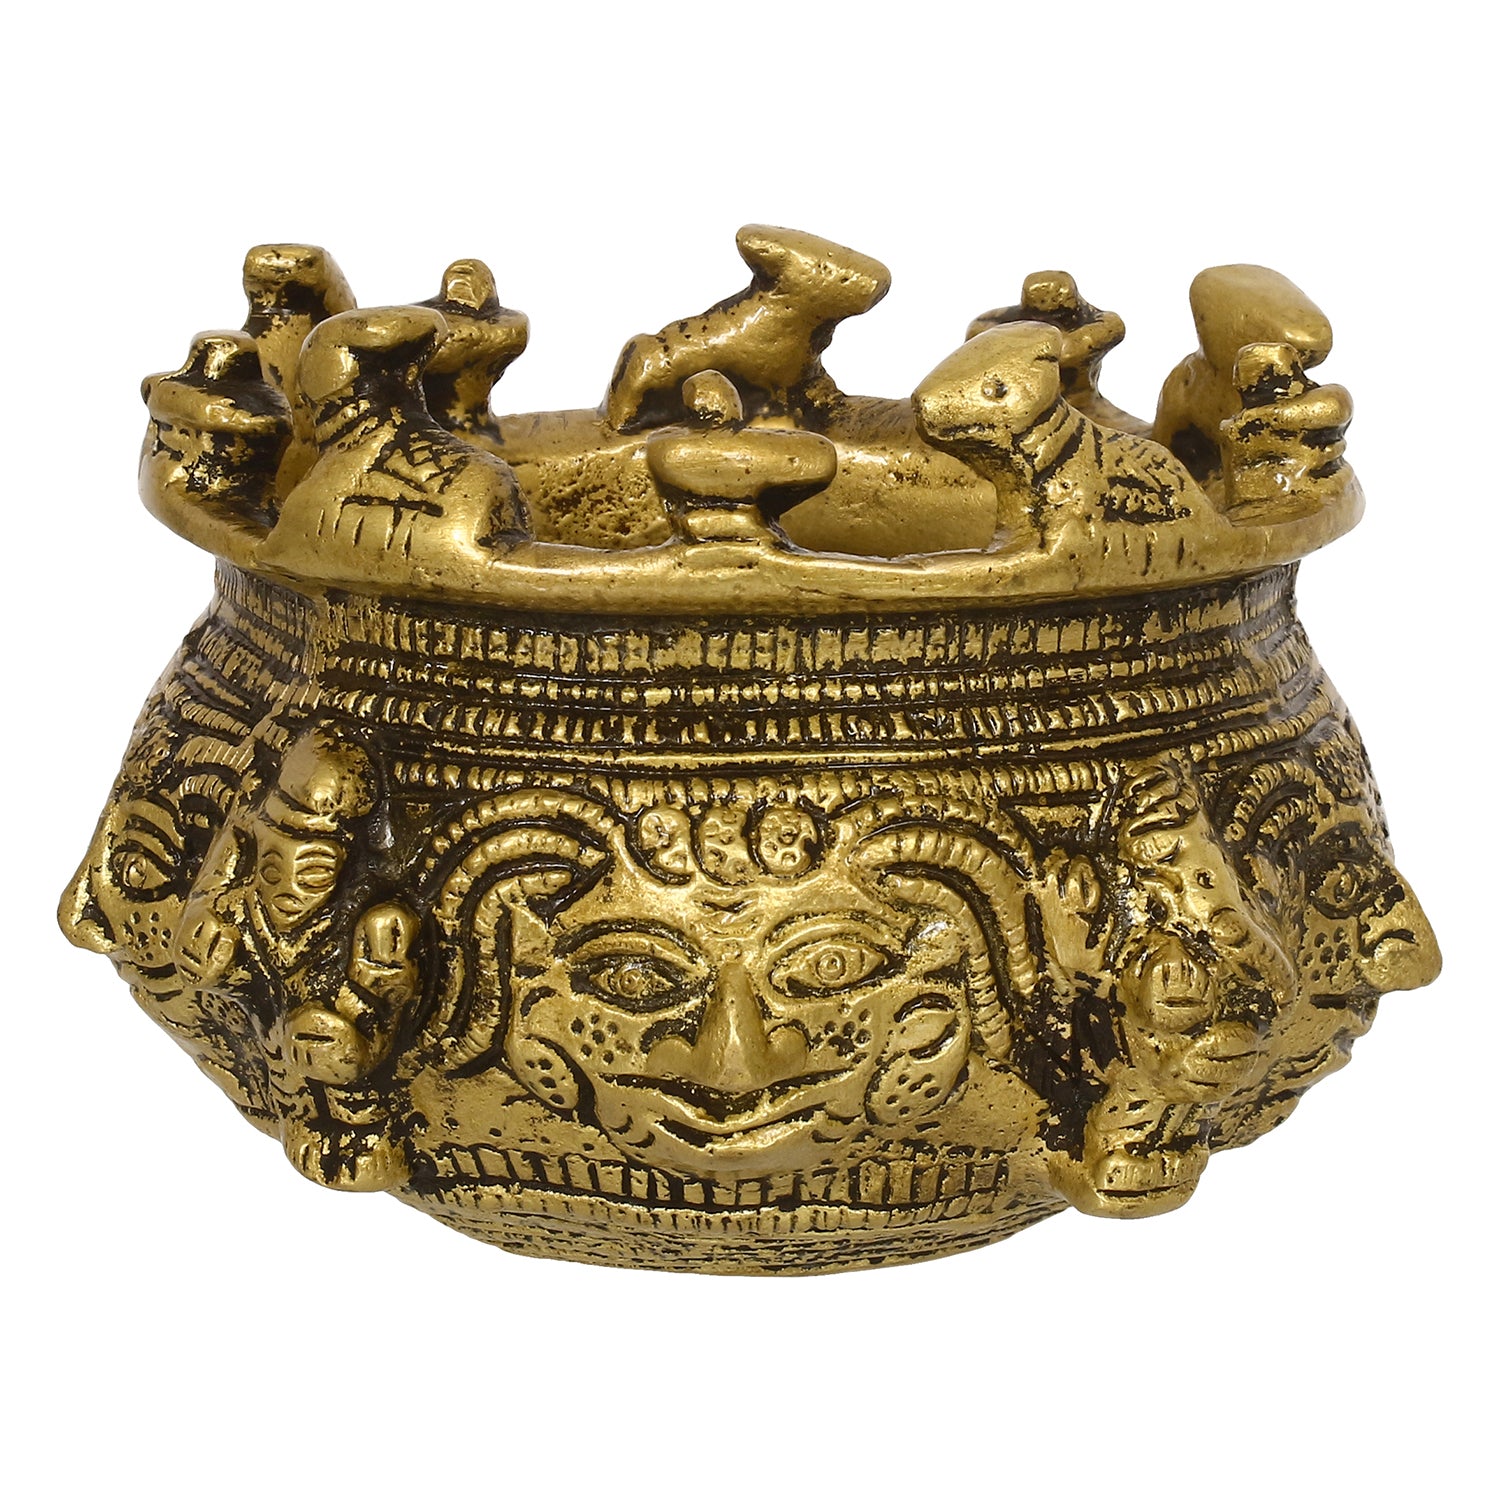 Golden Brass Auspicious Kalash, Shivling And Nandi On The Rim Of The Kalash/Pot For Religious Offerings 2